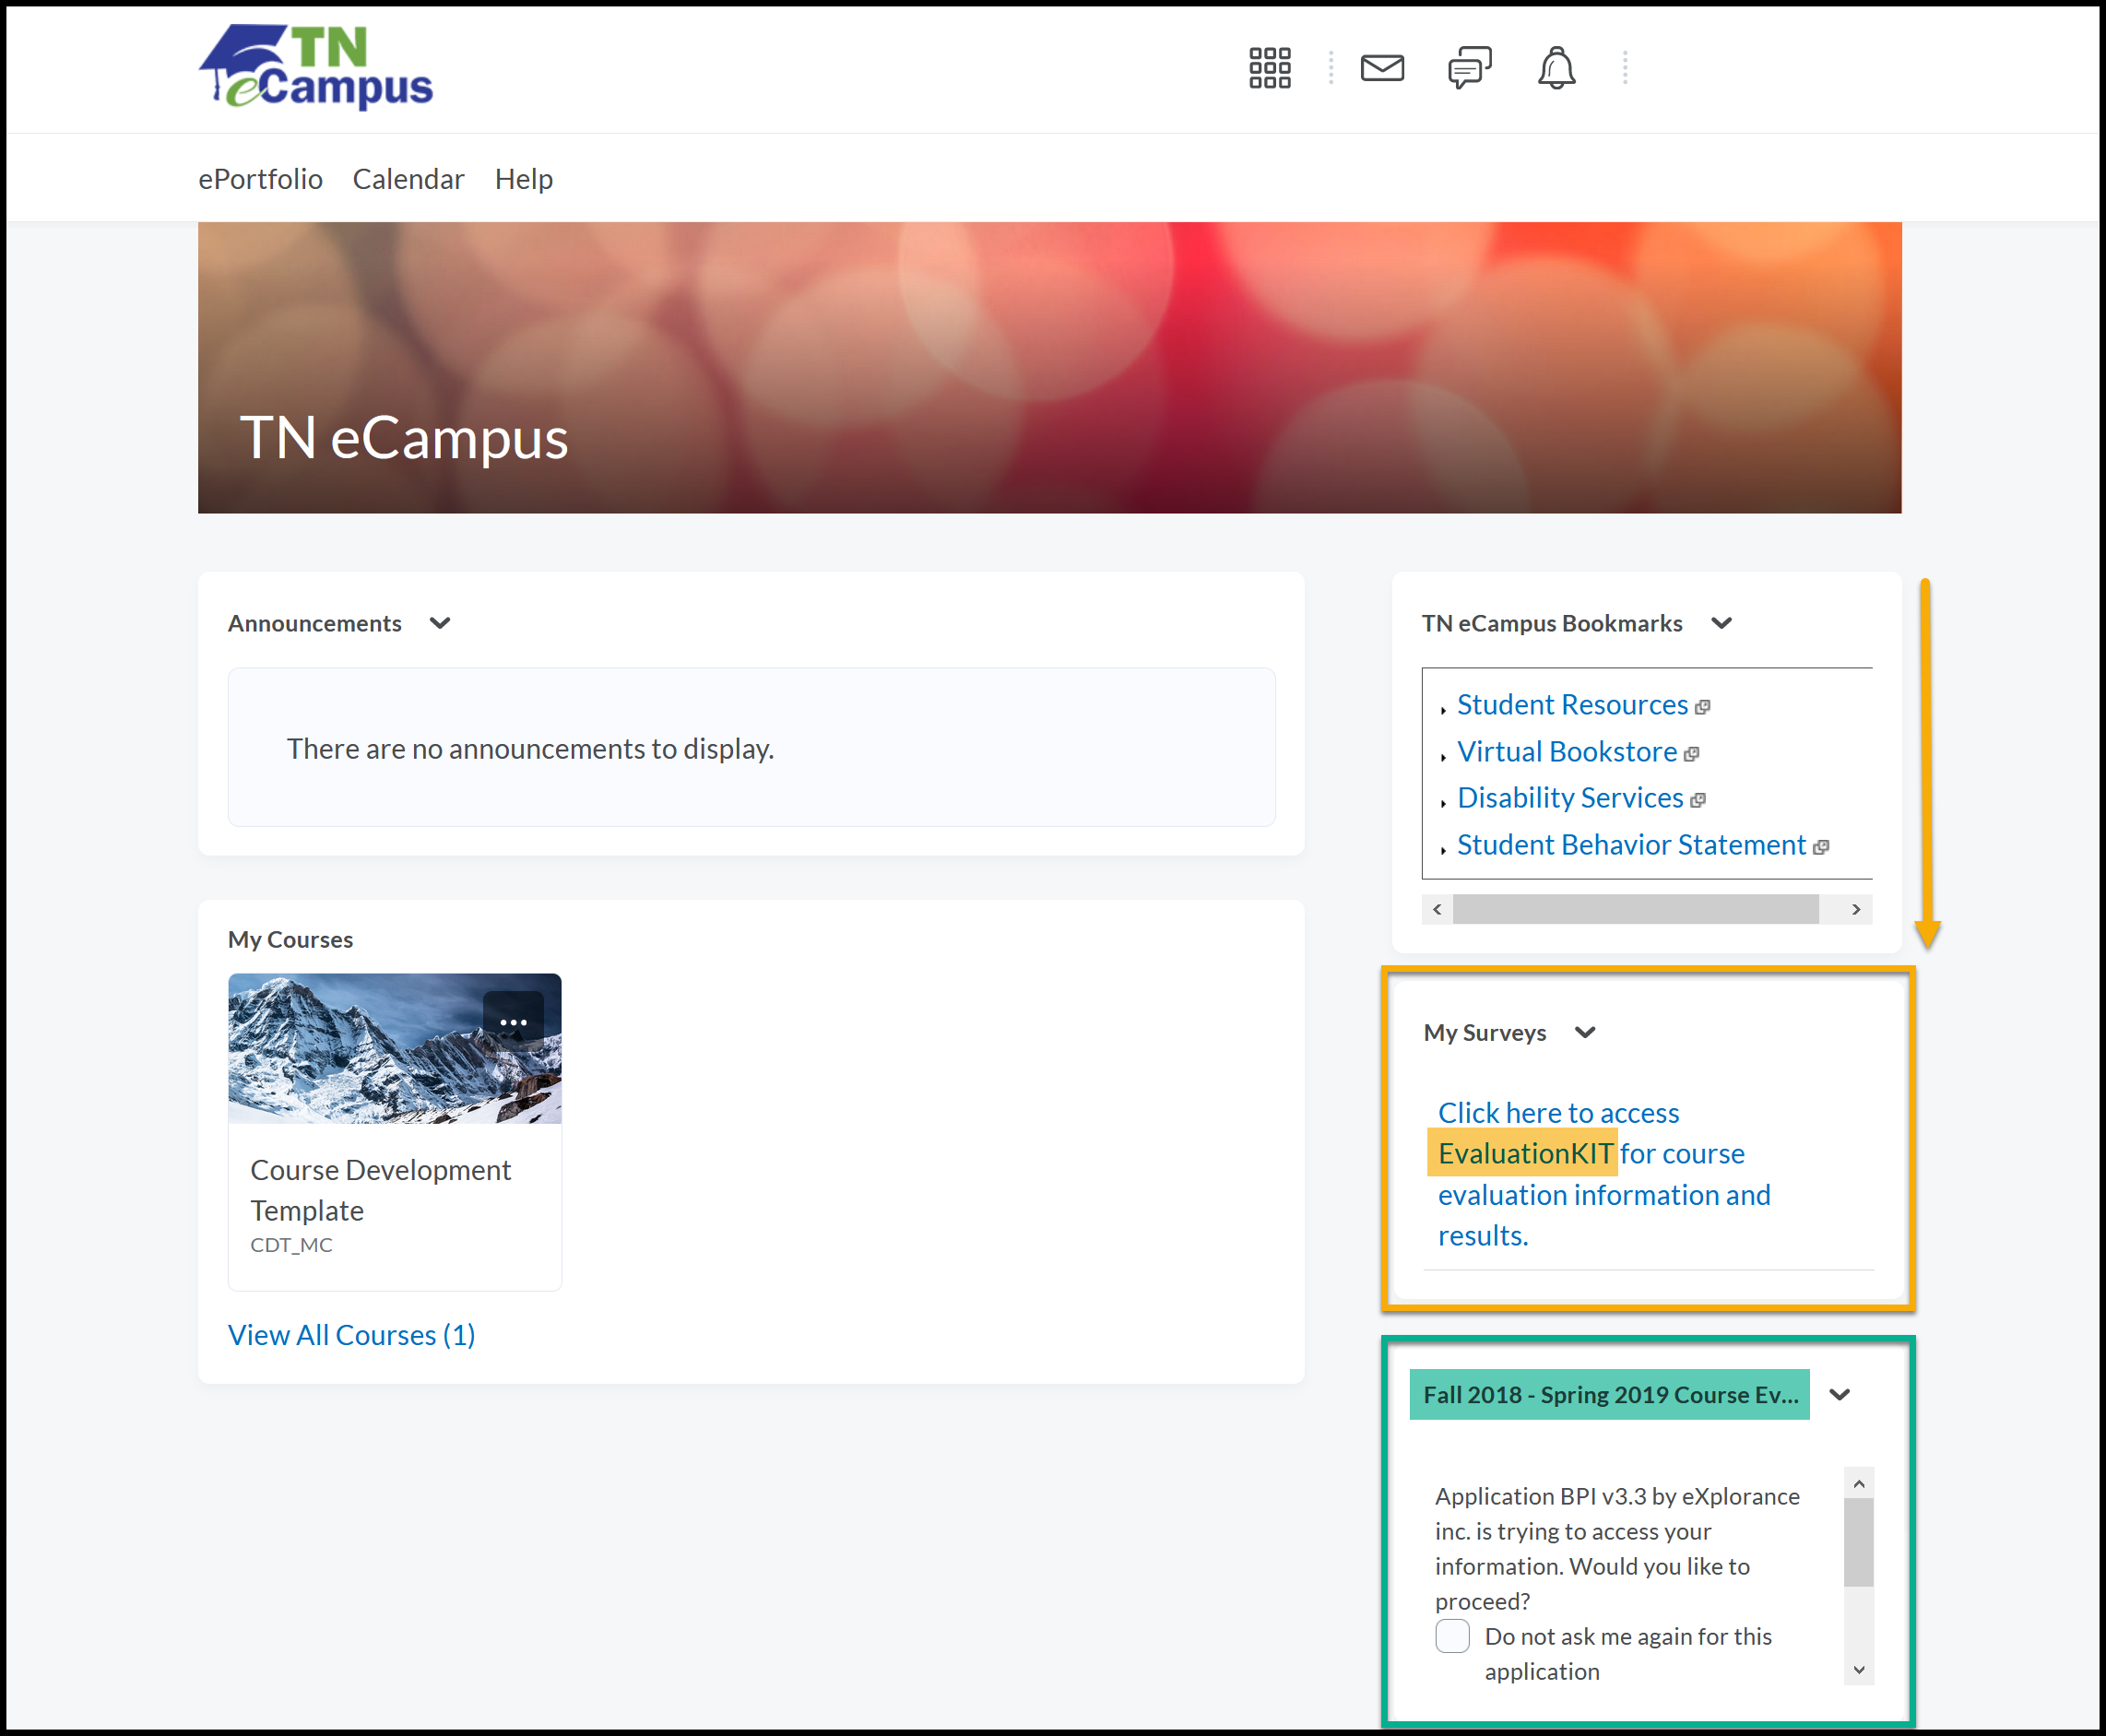 TN eCampus homepage with arrow pointing down (bottom of the page) to Evaluation Kit under My Surveys. Fall 2018 and spring 2019 also highlighted in another button/region.